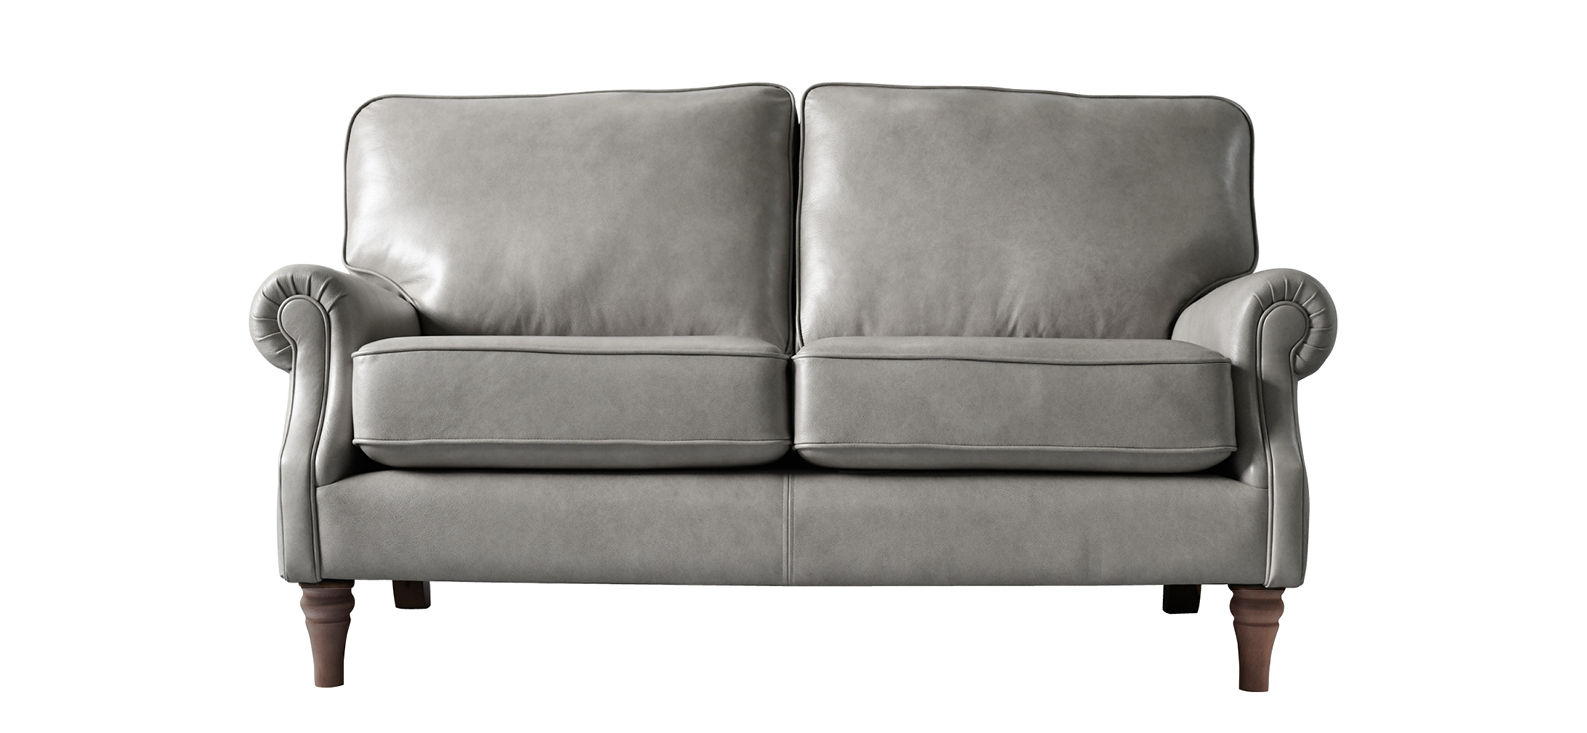 Taylor 2 Seater Leather Sofa